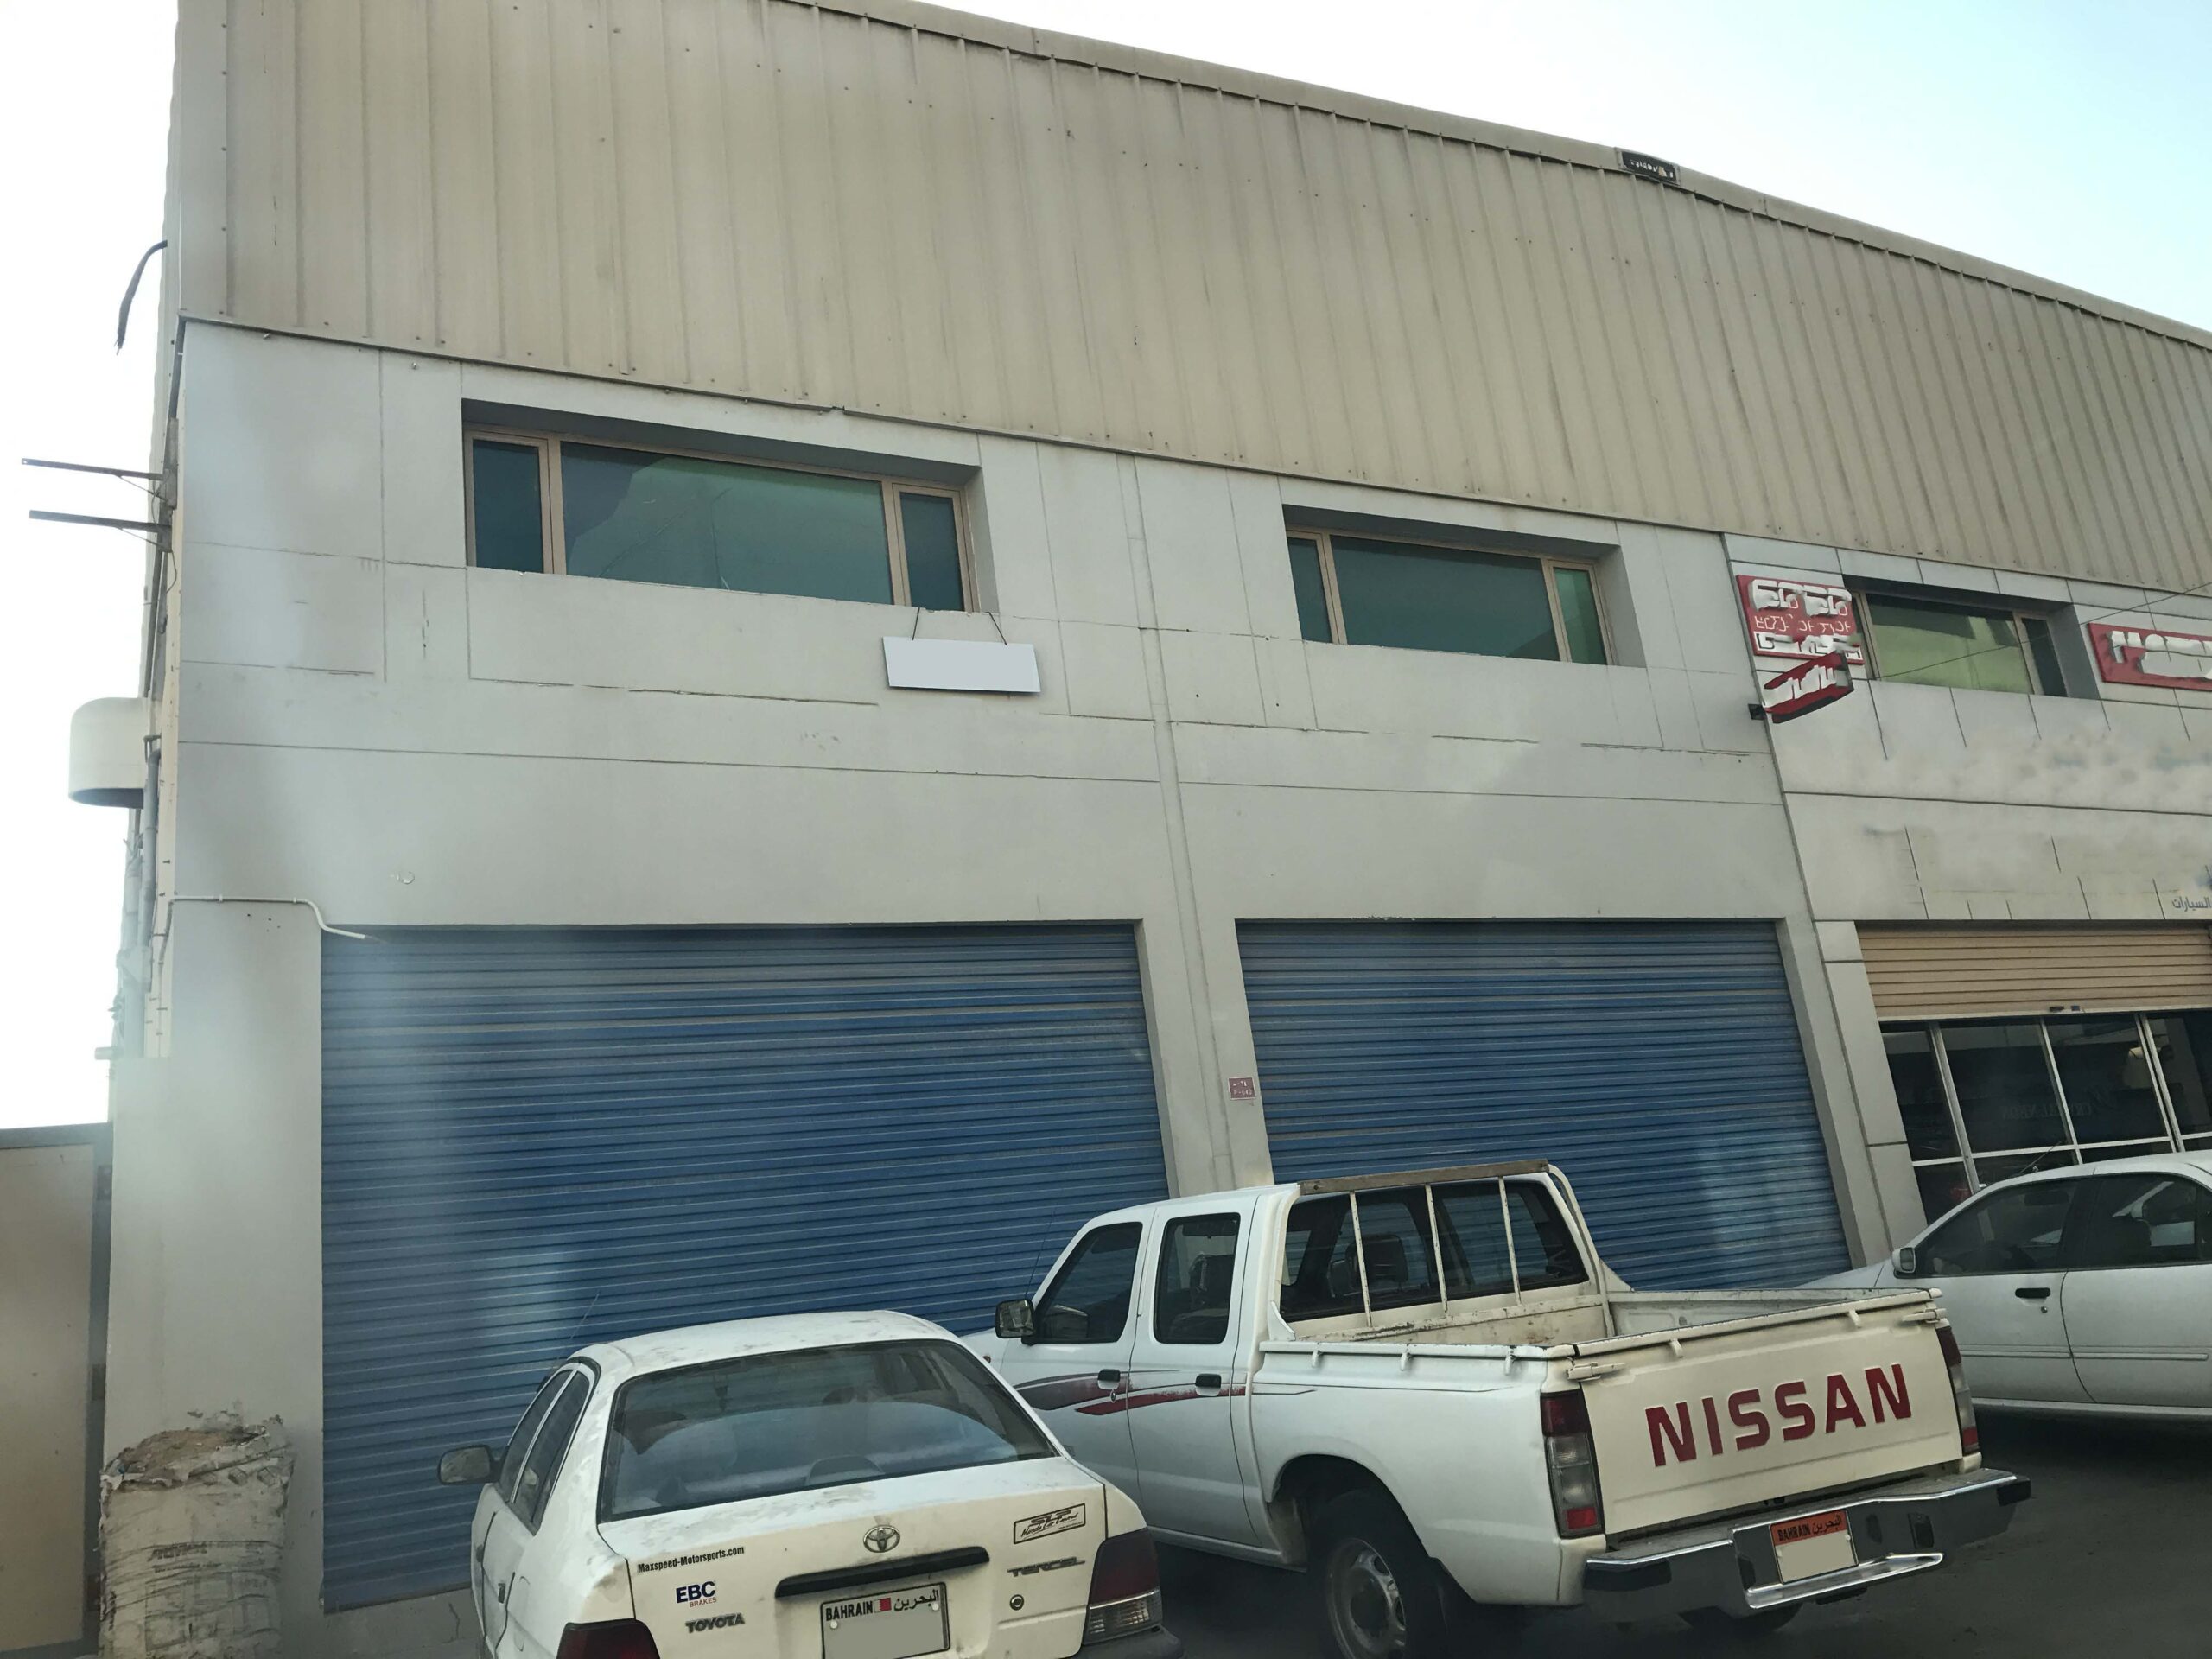 Shops / Workshop for rent, with total 220.00 SQM, in Tubli industrial area